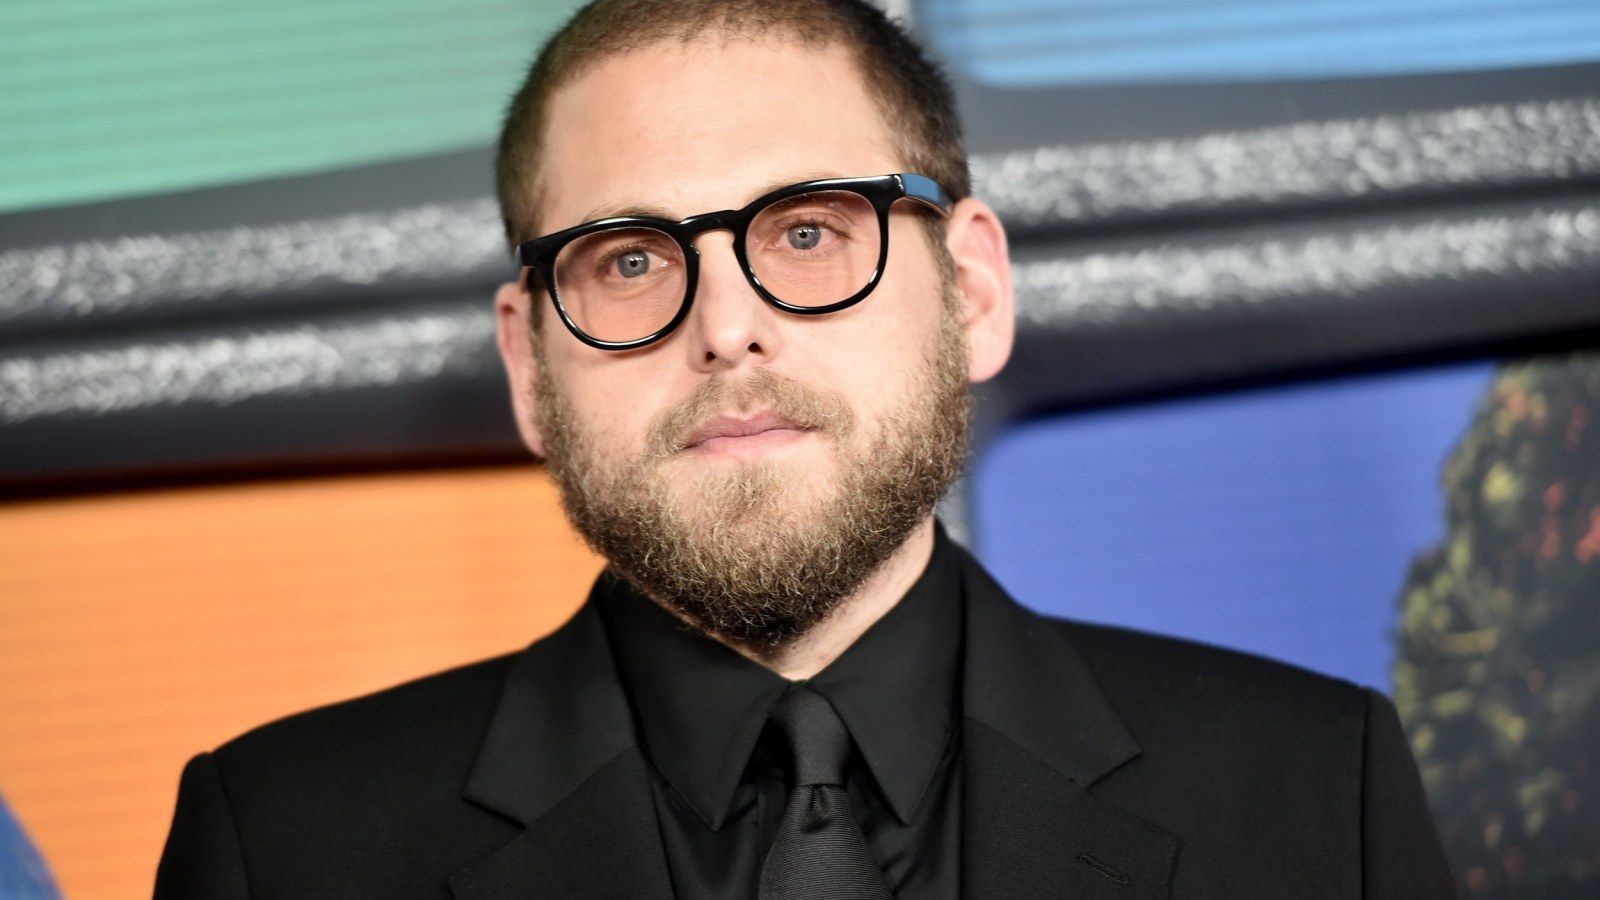 Jonah Hill on His First Film, 'Mid90s, ' And What He Learned From